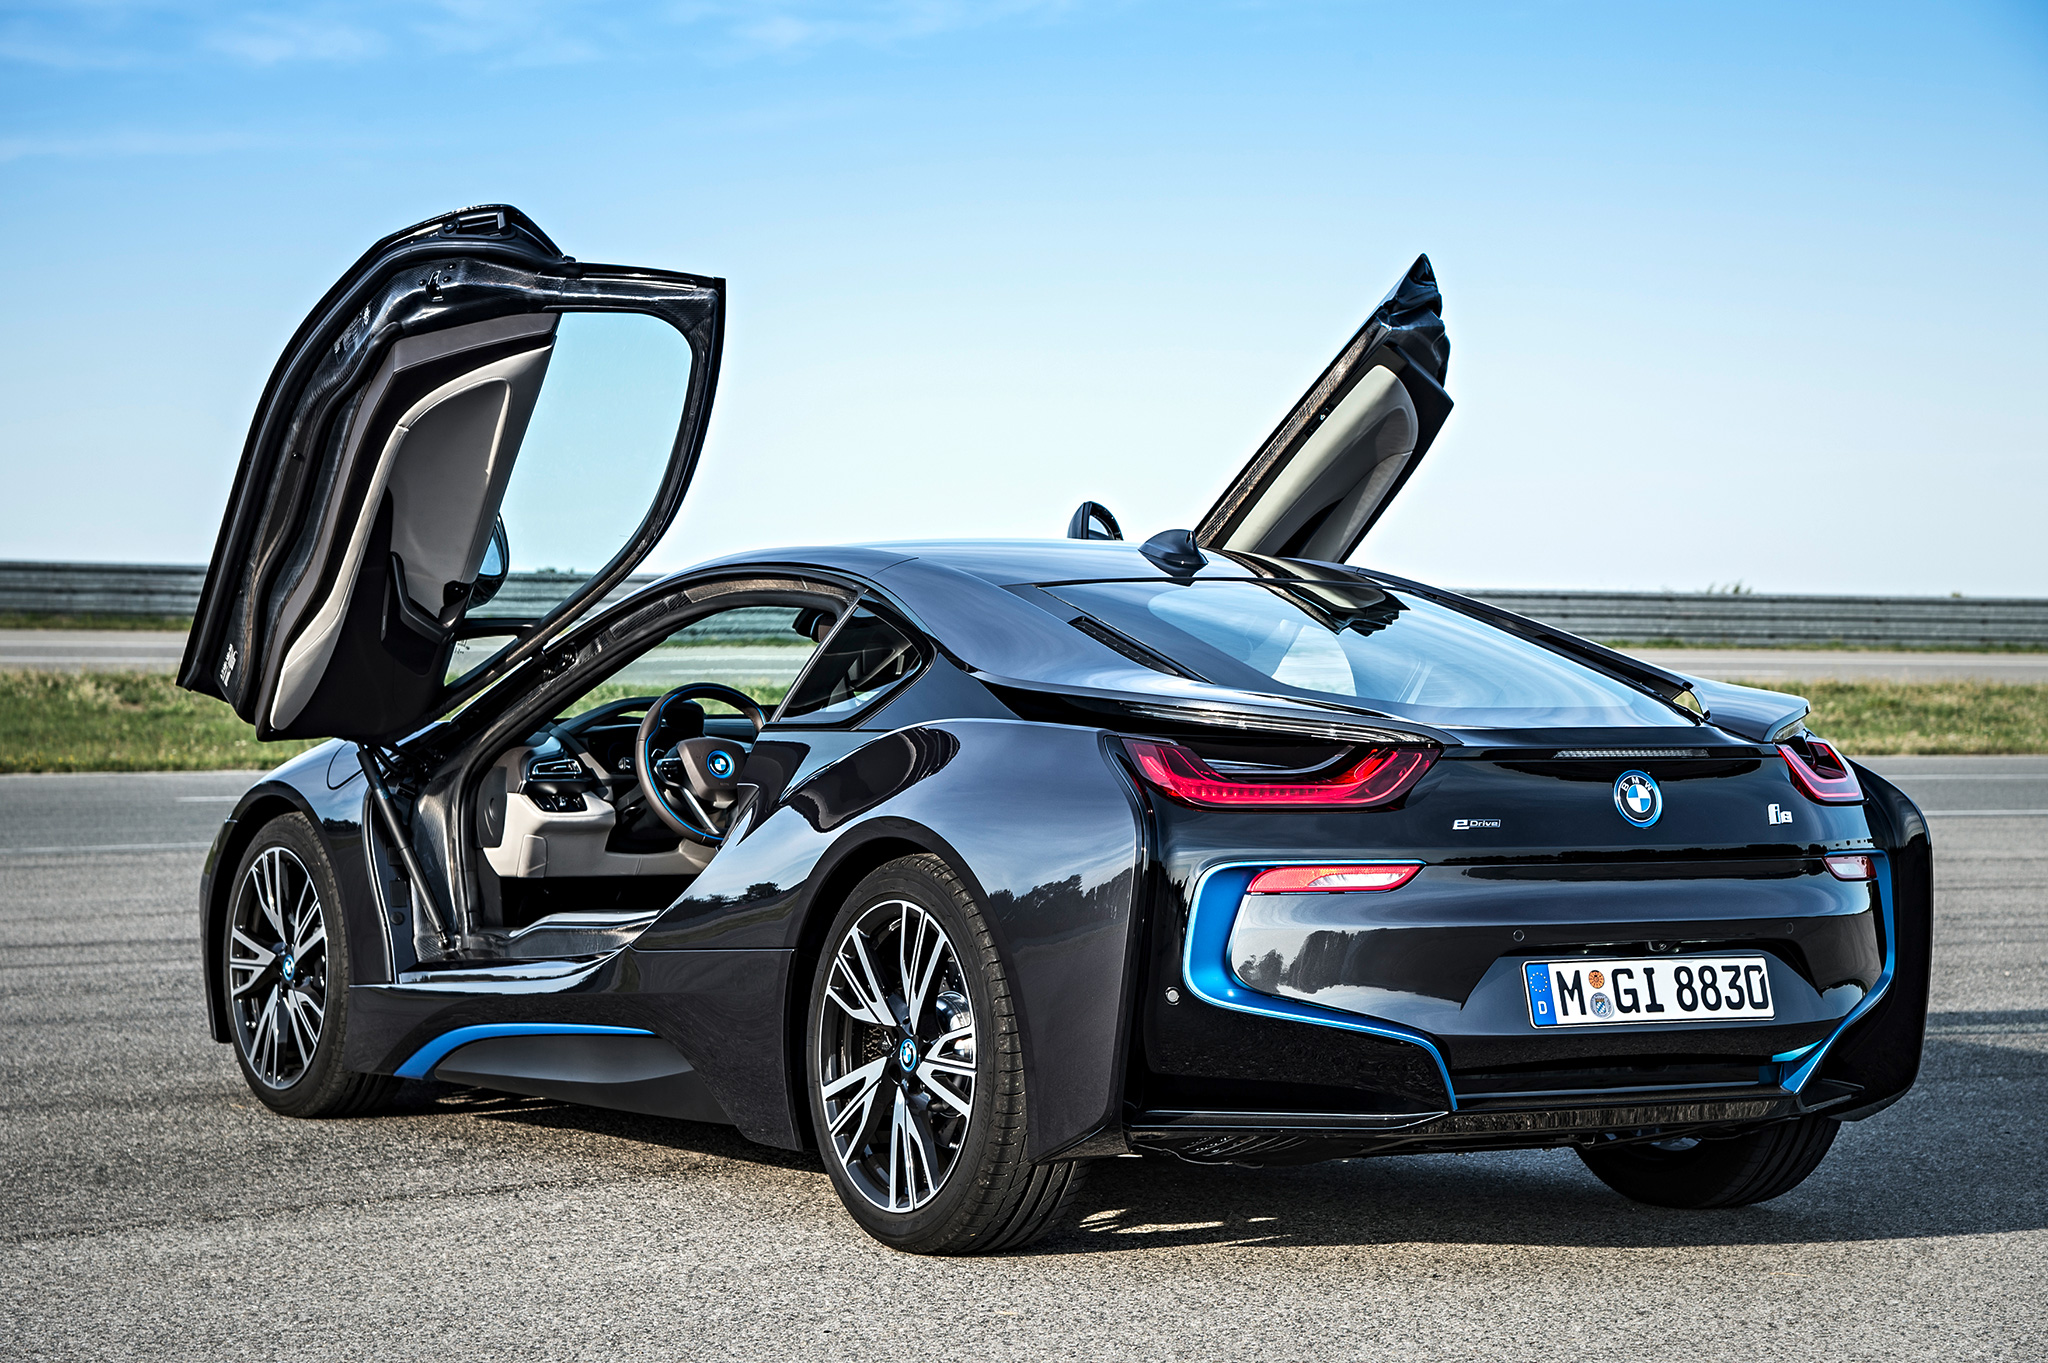 The BMW i8 Is Over-hyped, but That Doesn't Mean It's Not Great: Review -  Bloomberg